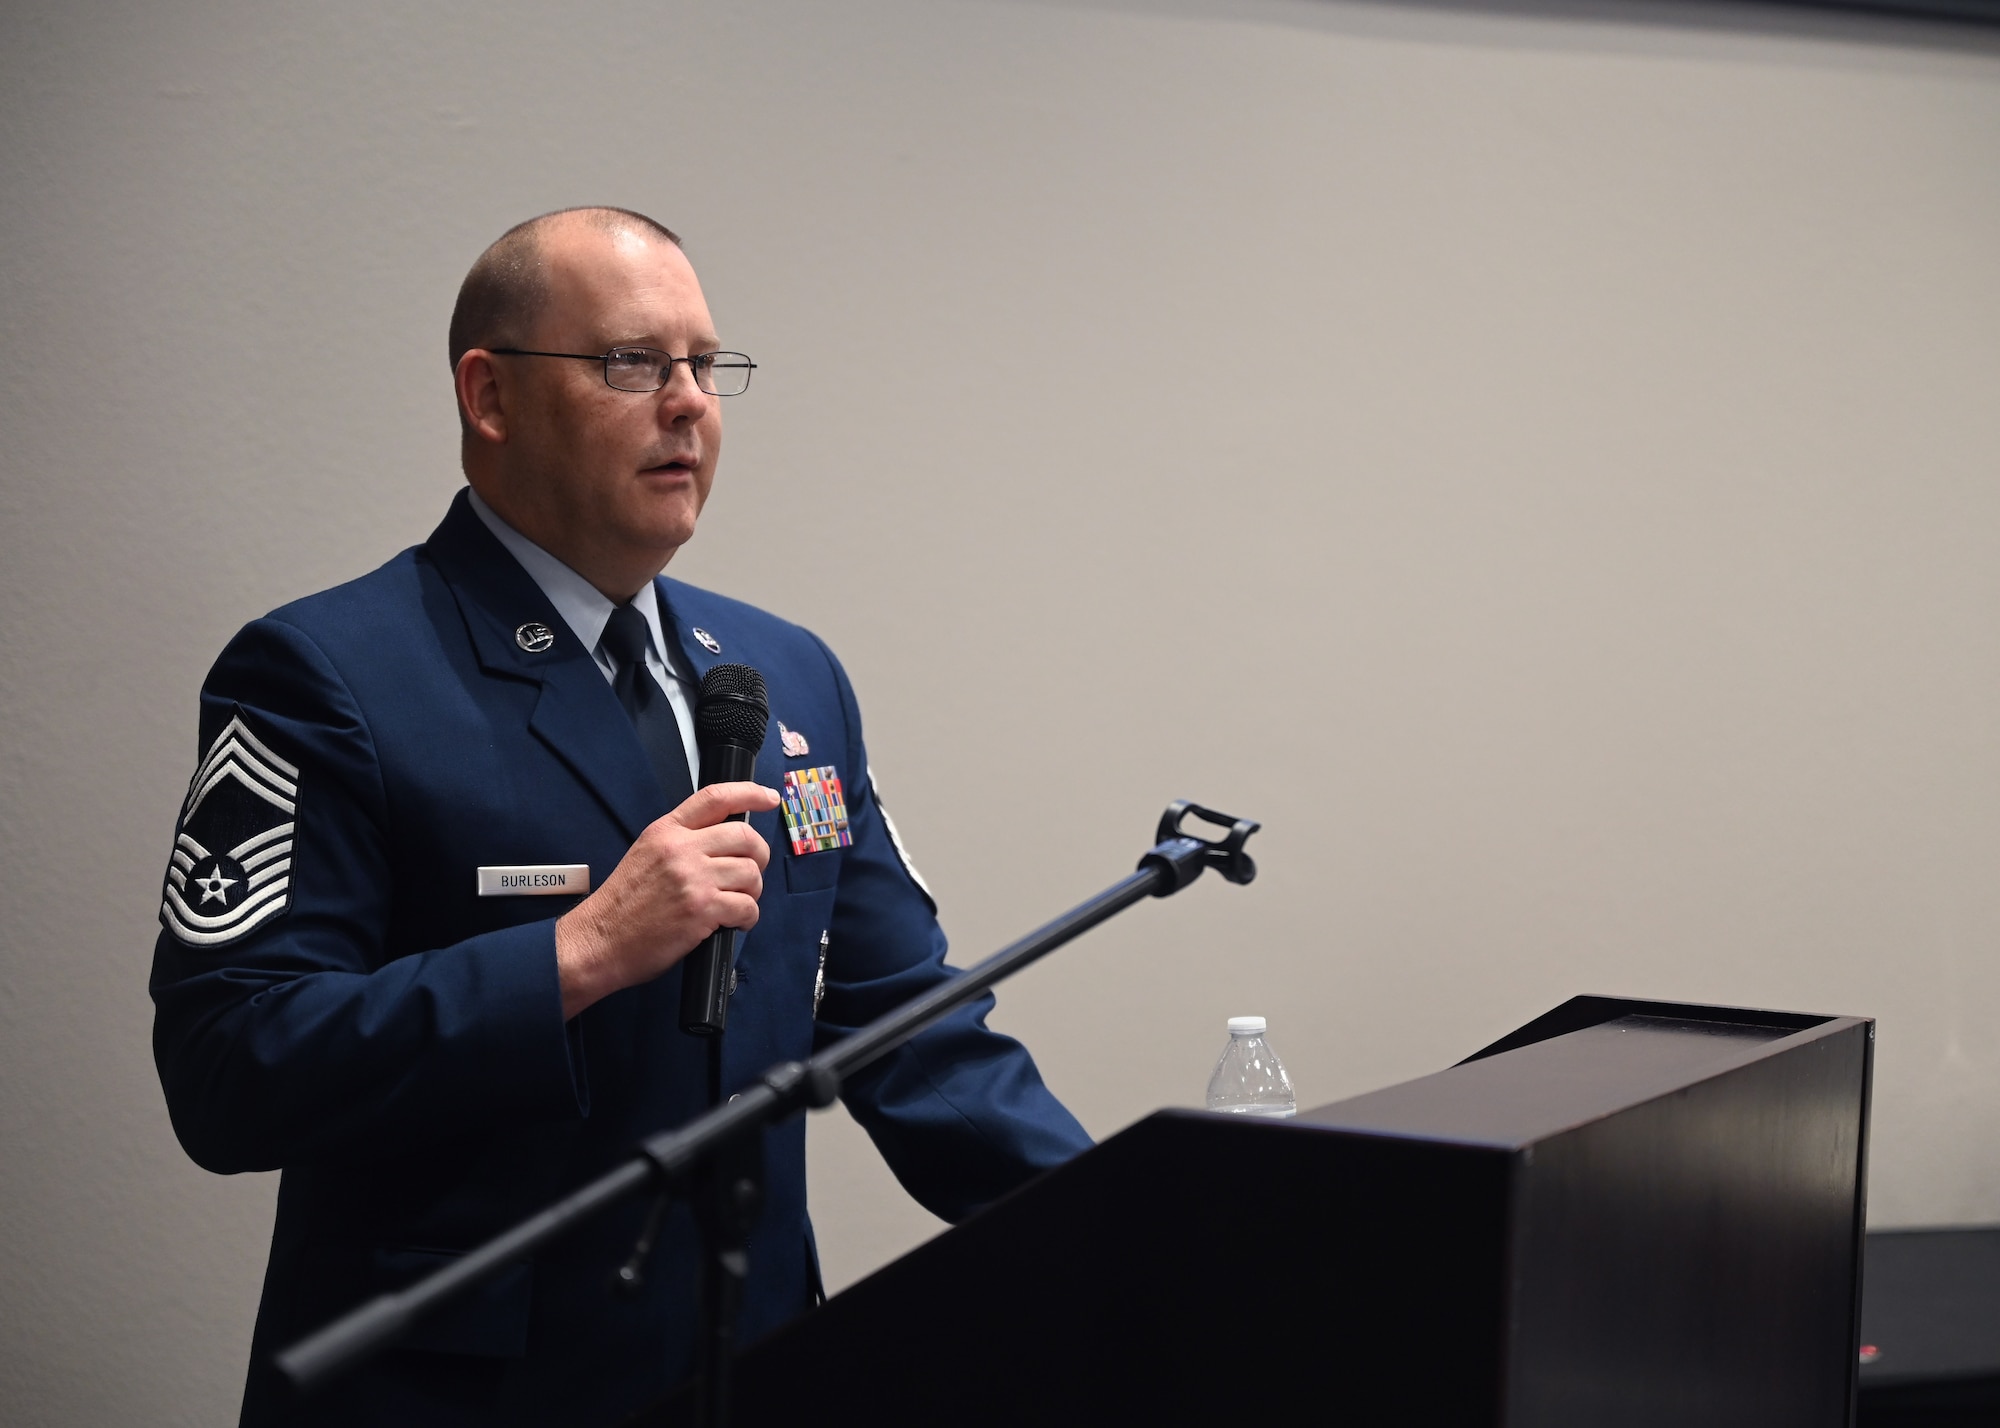 U.S. Air Force Chief Master Sgt. Anthony Burleson, 47th Mission Support Group superintendent, speaks at the Class 23-E Airman Leadership School graduation in the Powell Event Center, Goodfellow Air Force Base, Texas, July 20, 2023. Burleson encouraged the graduates to lean on each other and the noncommissioned officers around them. (U.S. Air Force photo by Senior Airman Ethan Sherwood.)